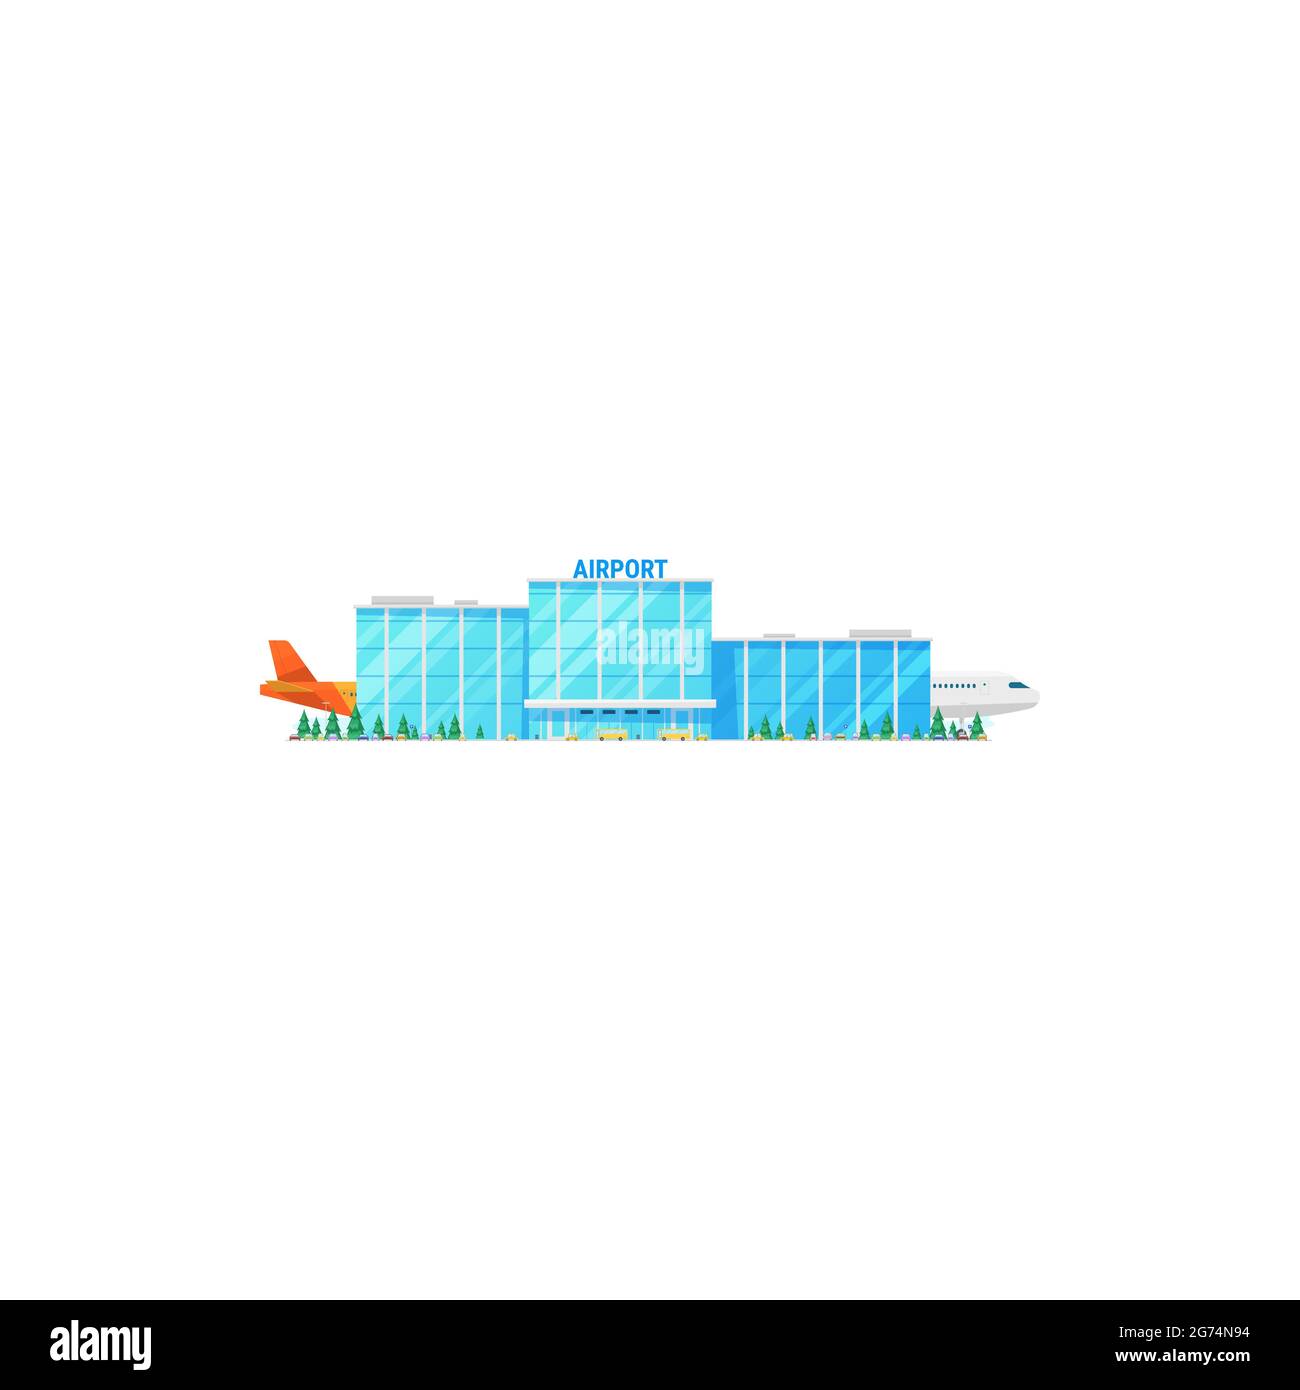 International airlines facade exterior, flying airplanes and buses public transport isolated. Vector airport terminal building, passenger planes and c Stock Vector